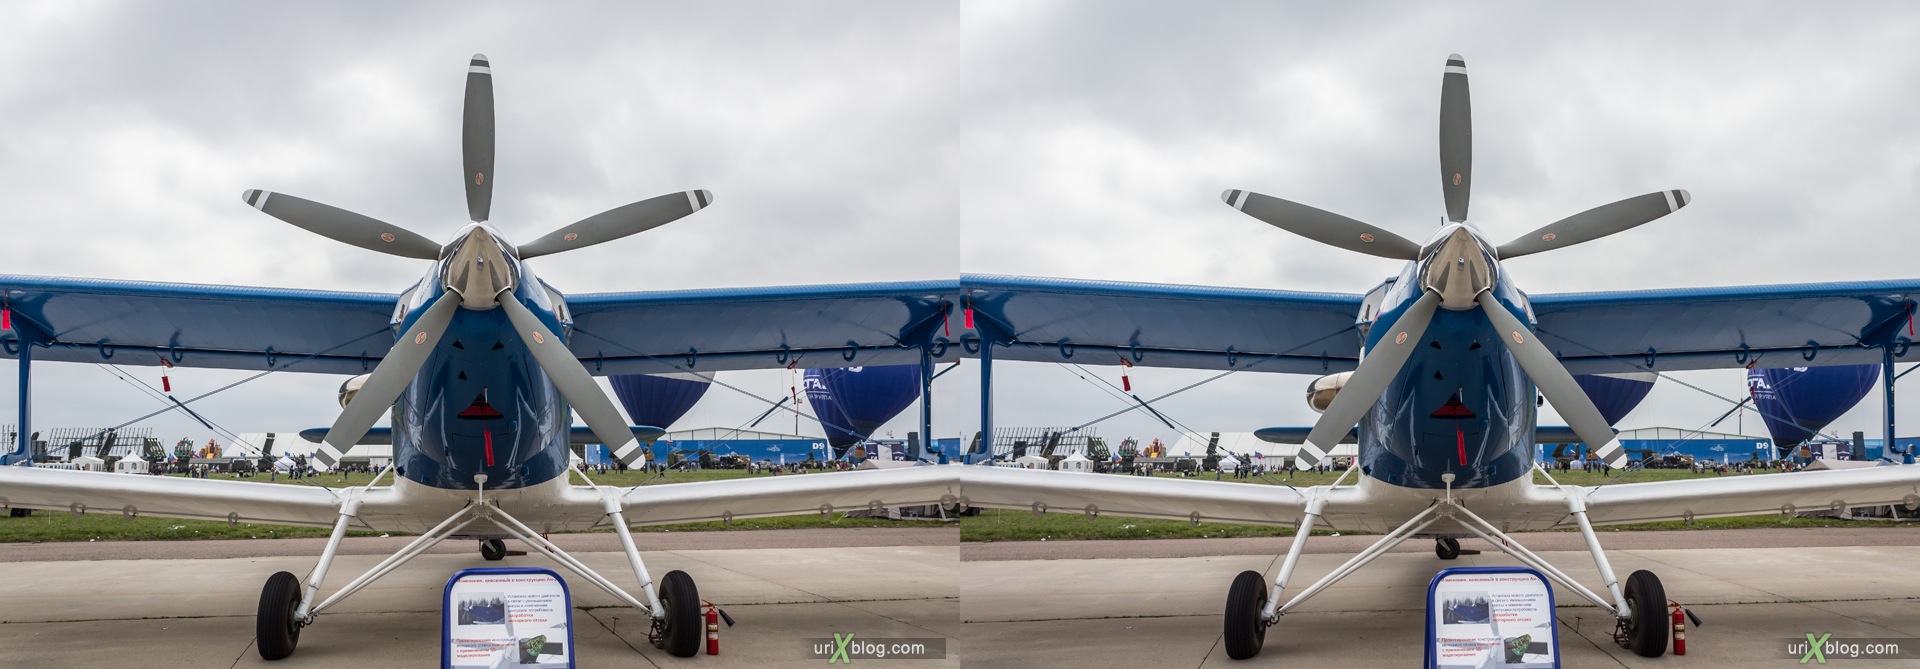 2013, TVS-2MS (An-2MS), MAKS, International Aviation and Space Salon, Russia, Ramenskoye airfield, airplane, 3D, stereo pair, cross-eyed, crossview, cross view stereo pair, stereoscopic